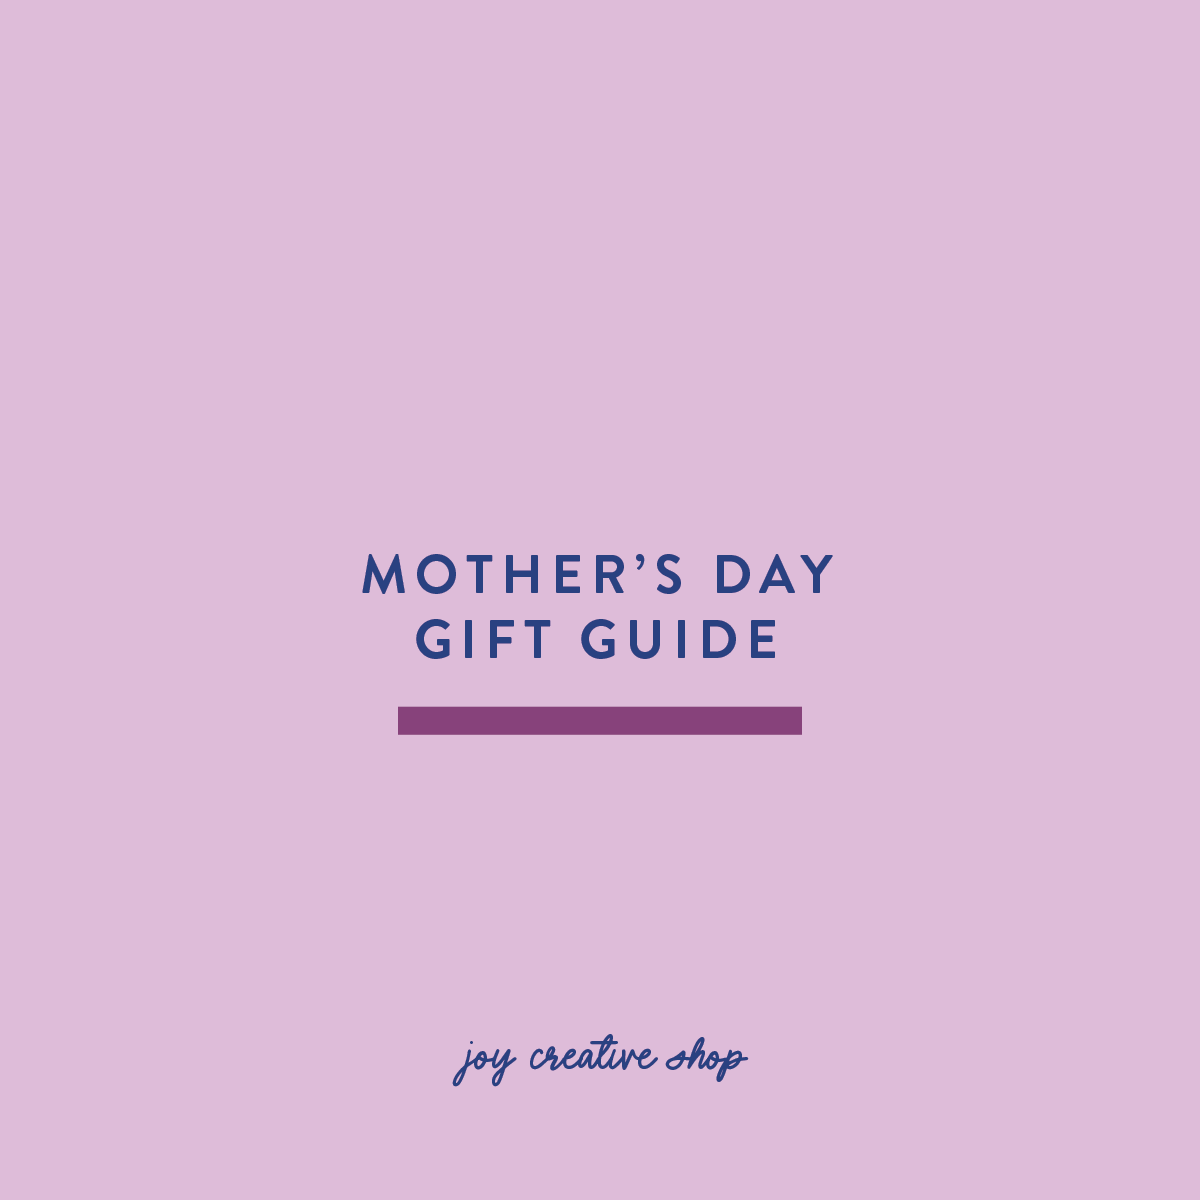 Mother's Day Inspiration